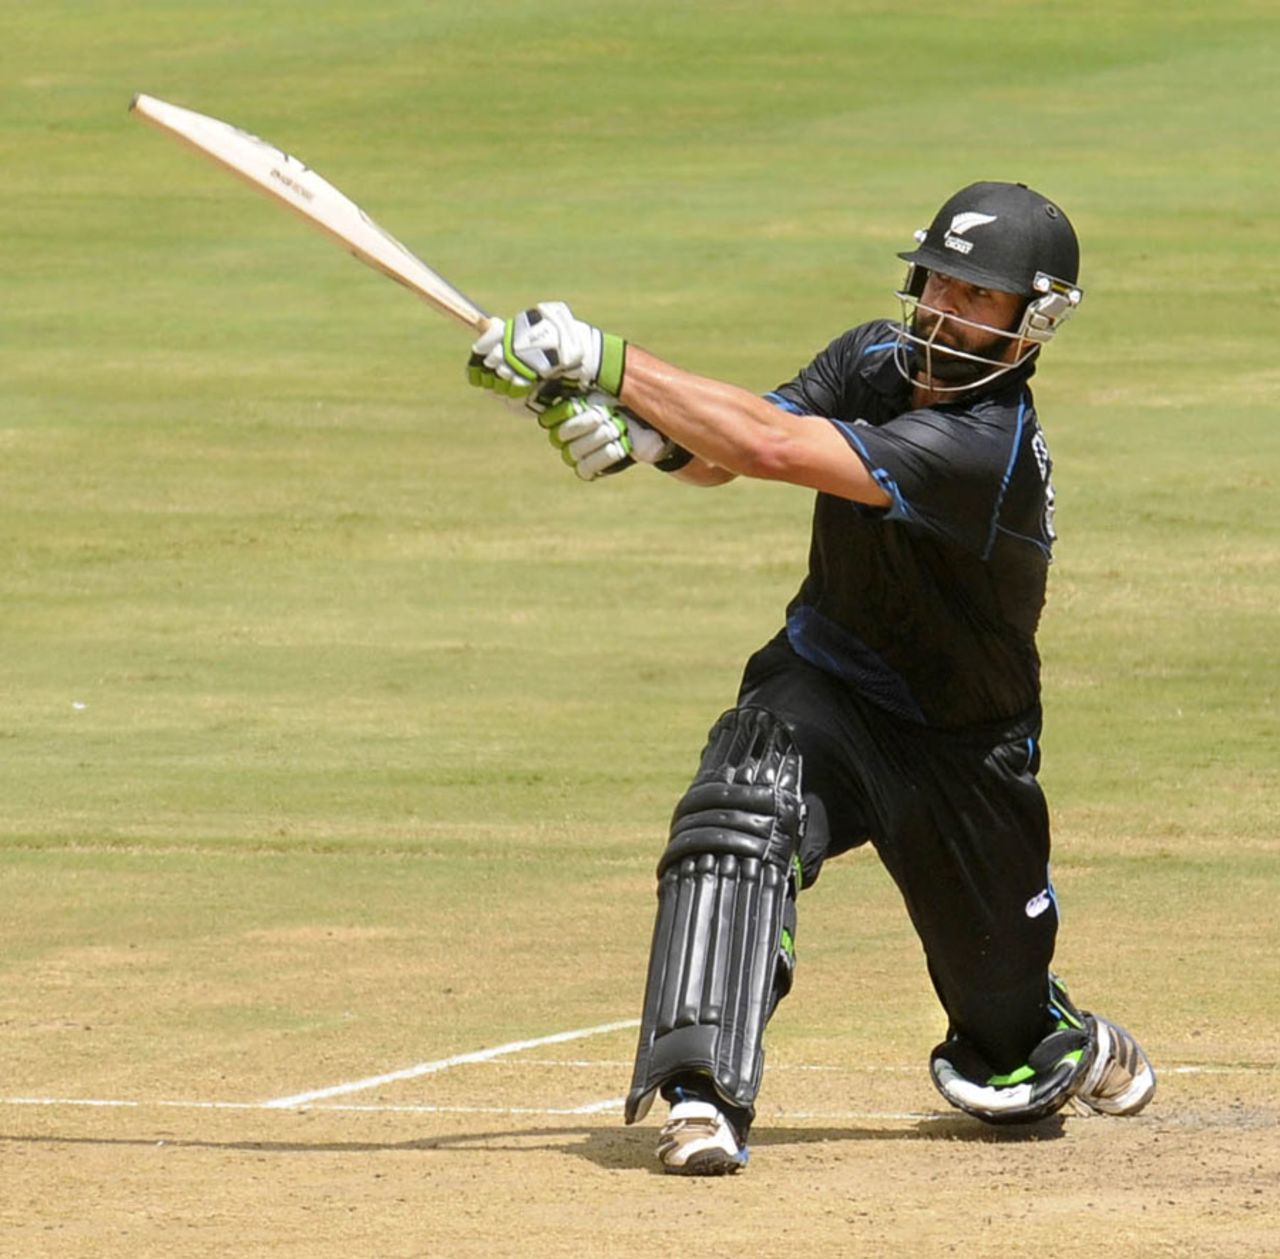 Anton Devcich top scored with 66, India A v New Zealand A, 3rd unofficial ODI, Visakhapatnam, September 12, 2013